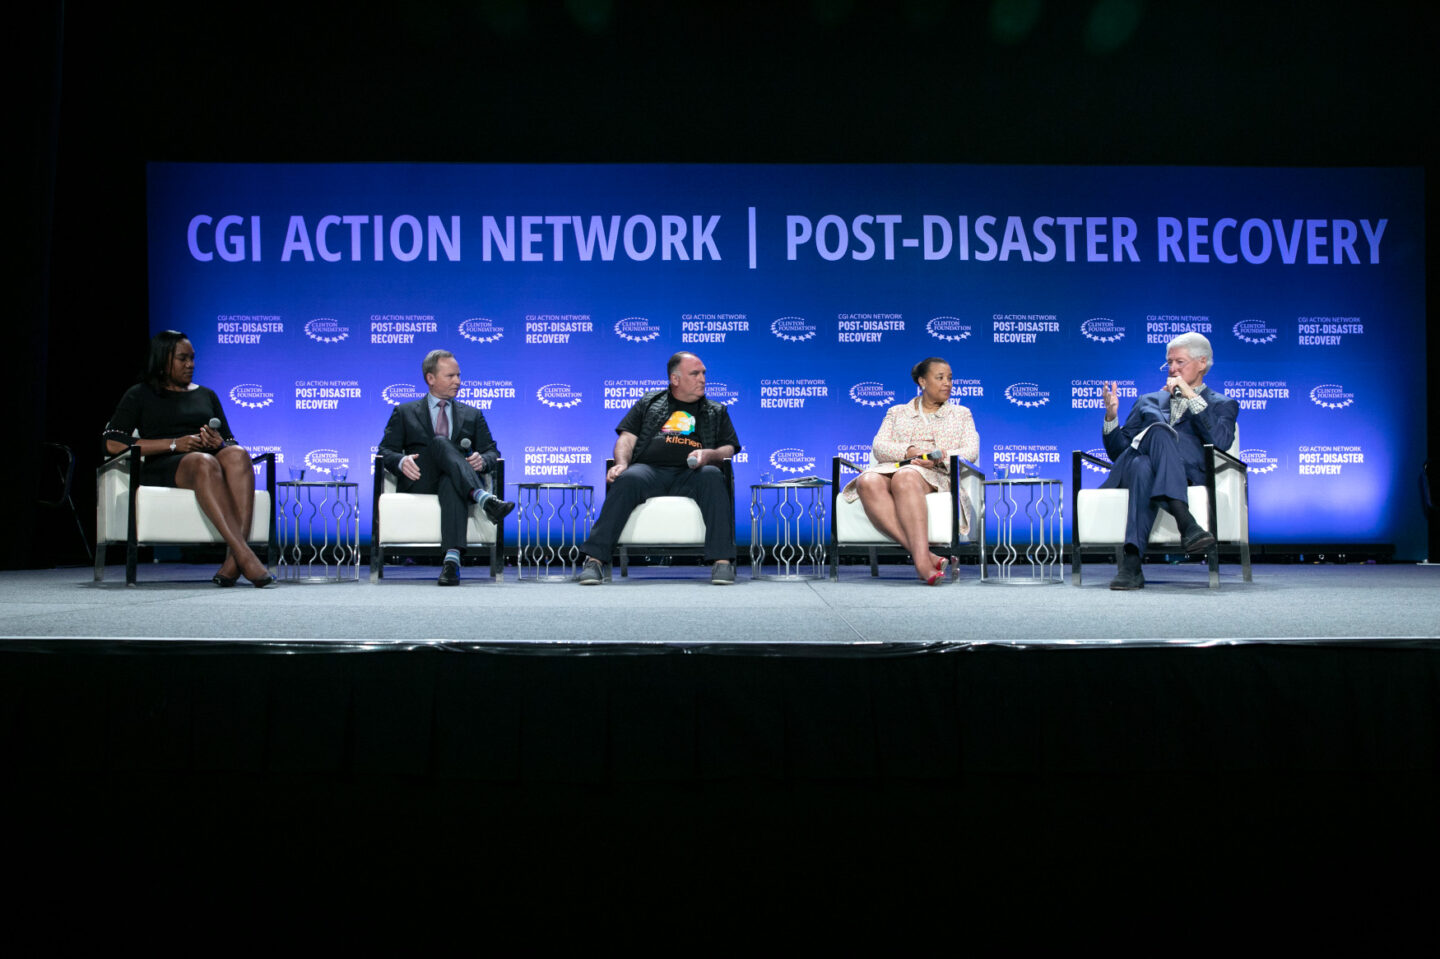 President Clinton moderates a panel discussion in Puerto Rico